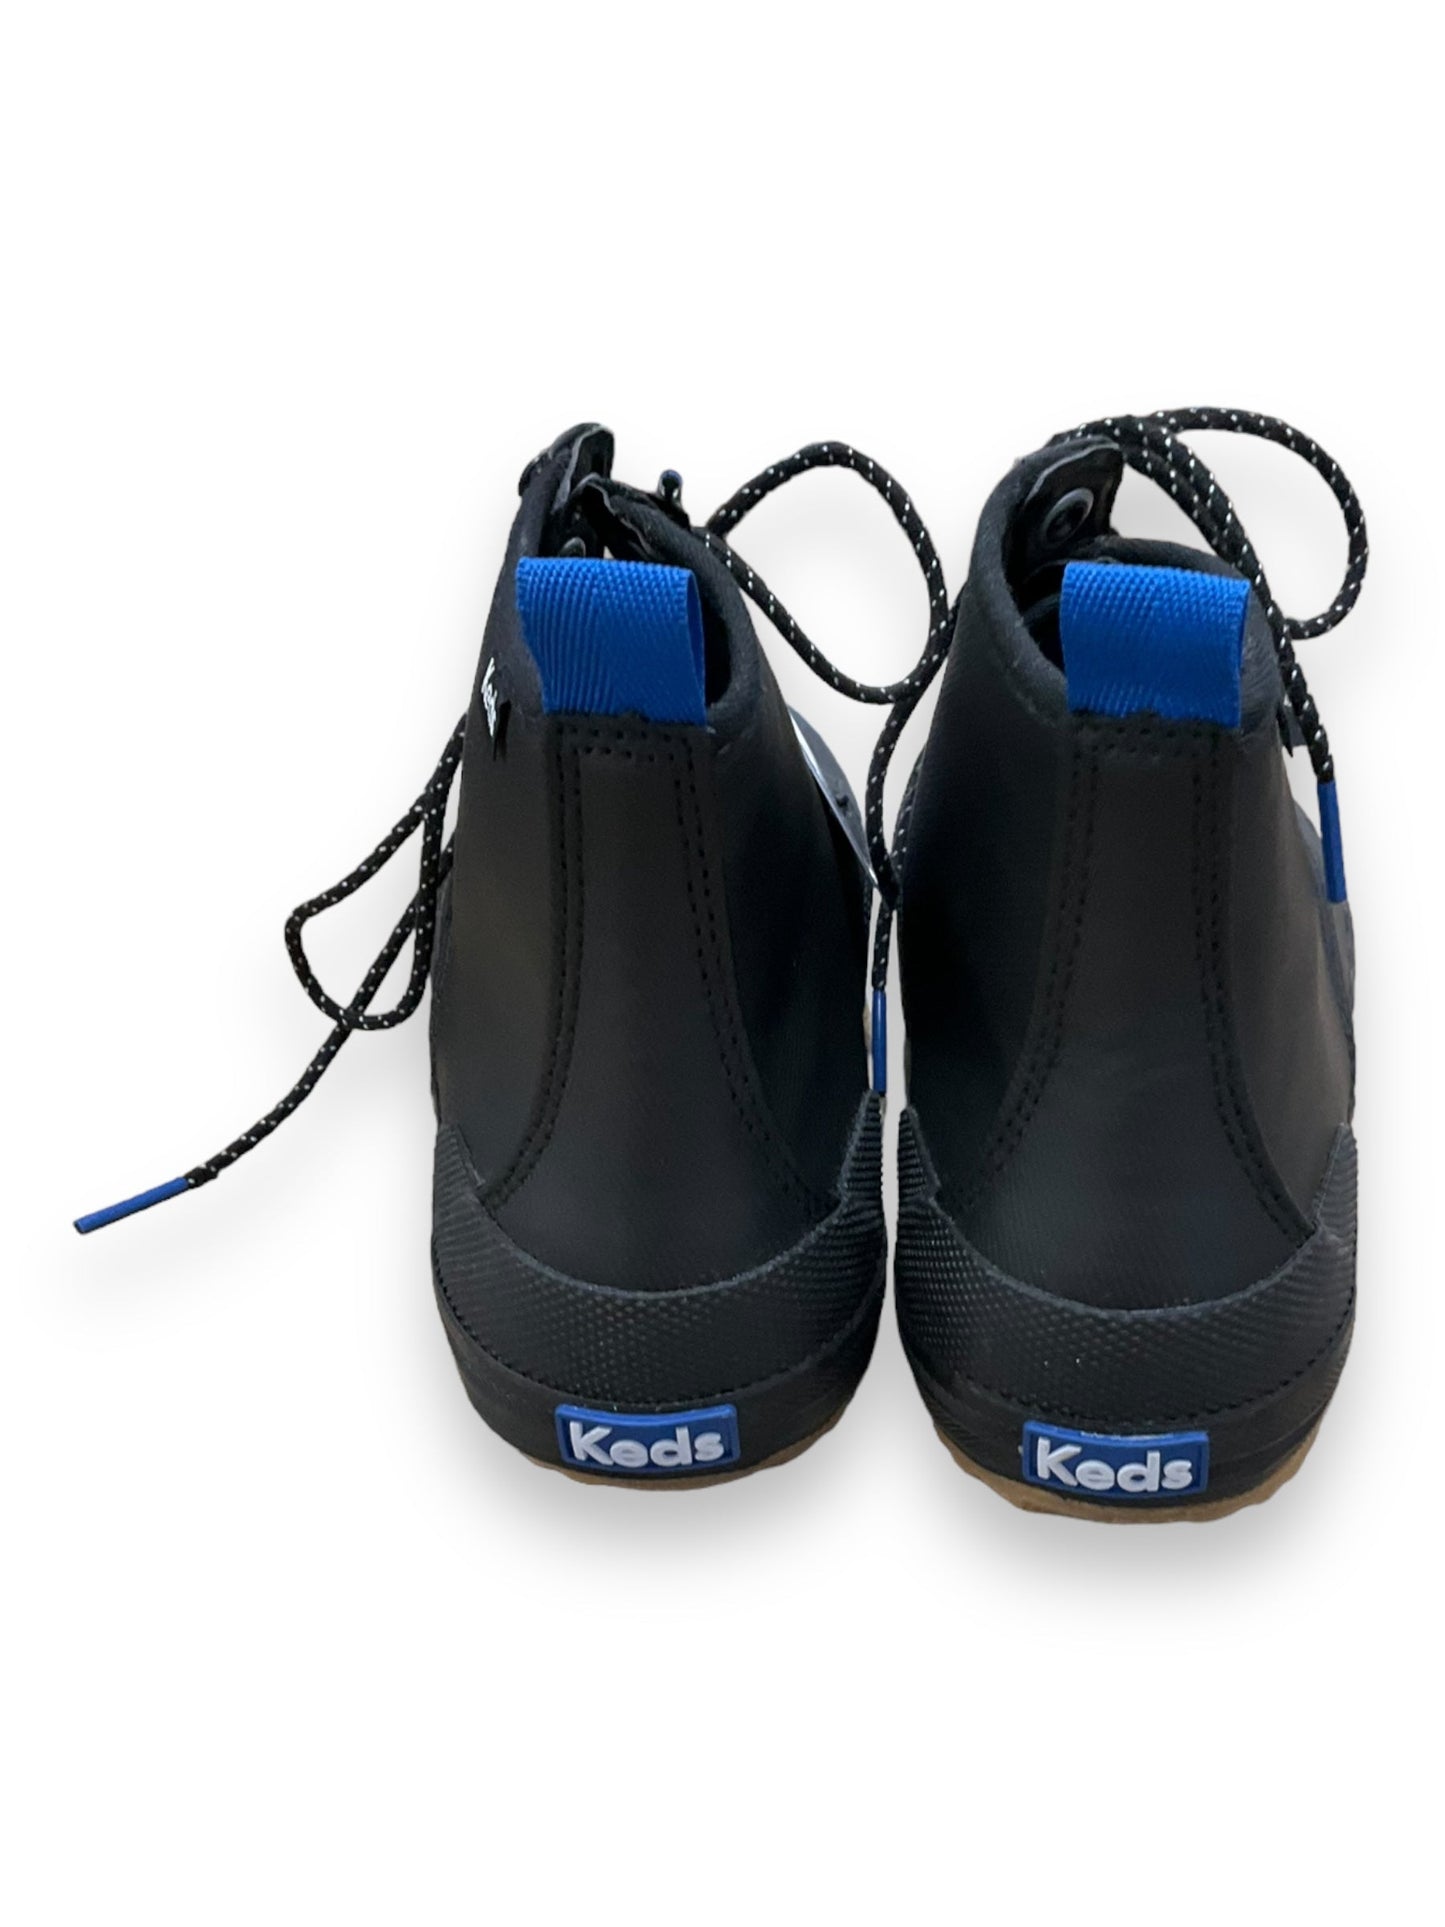 Boots Rain By Keds  Size: 6.5